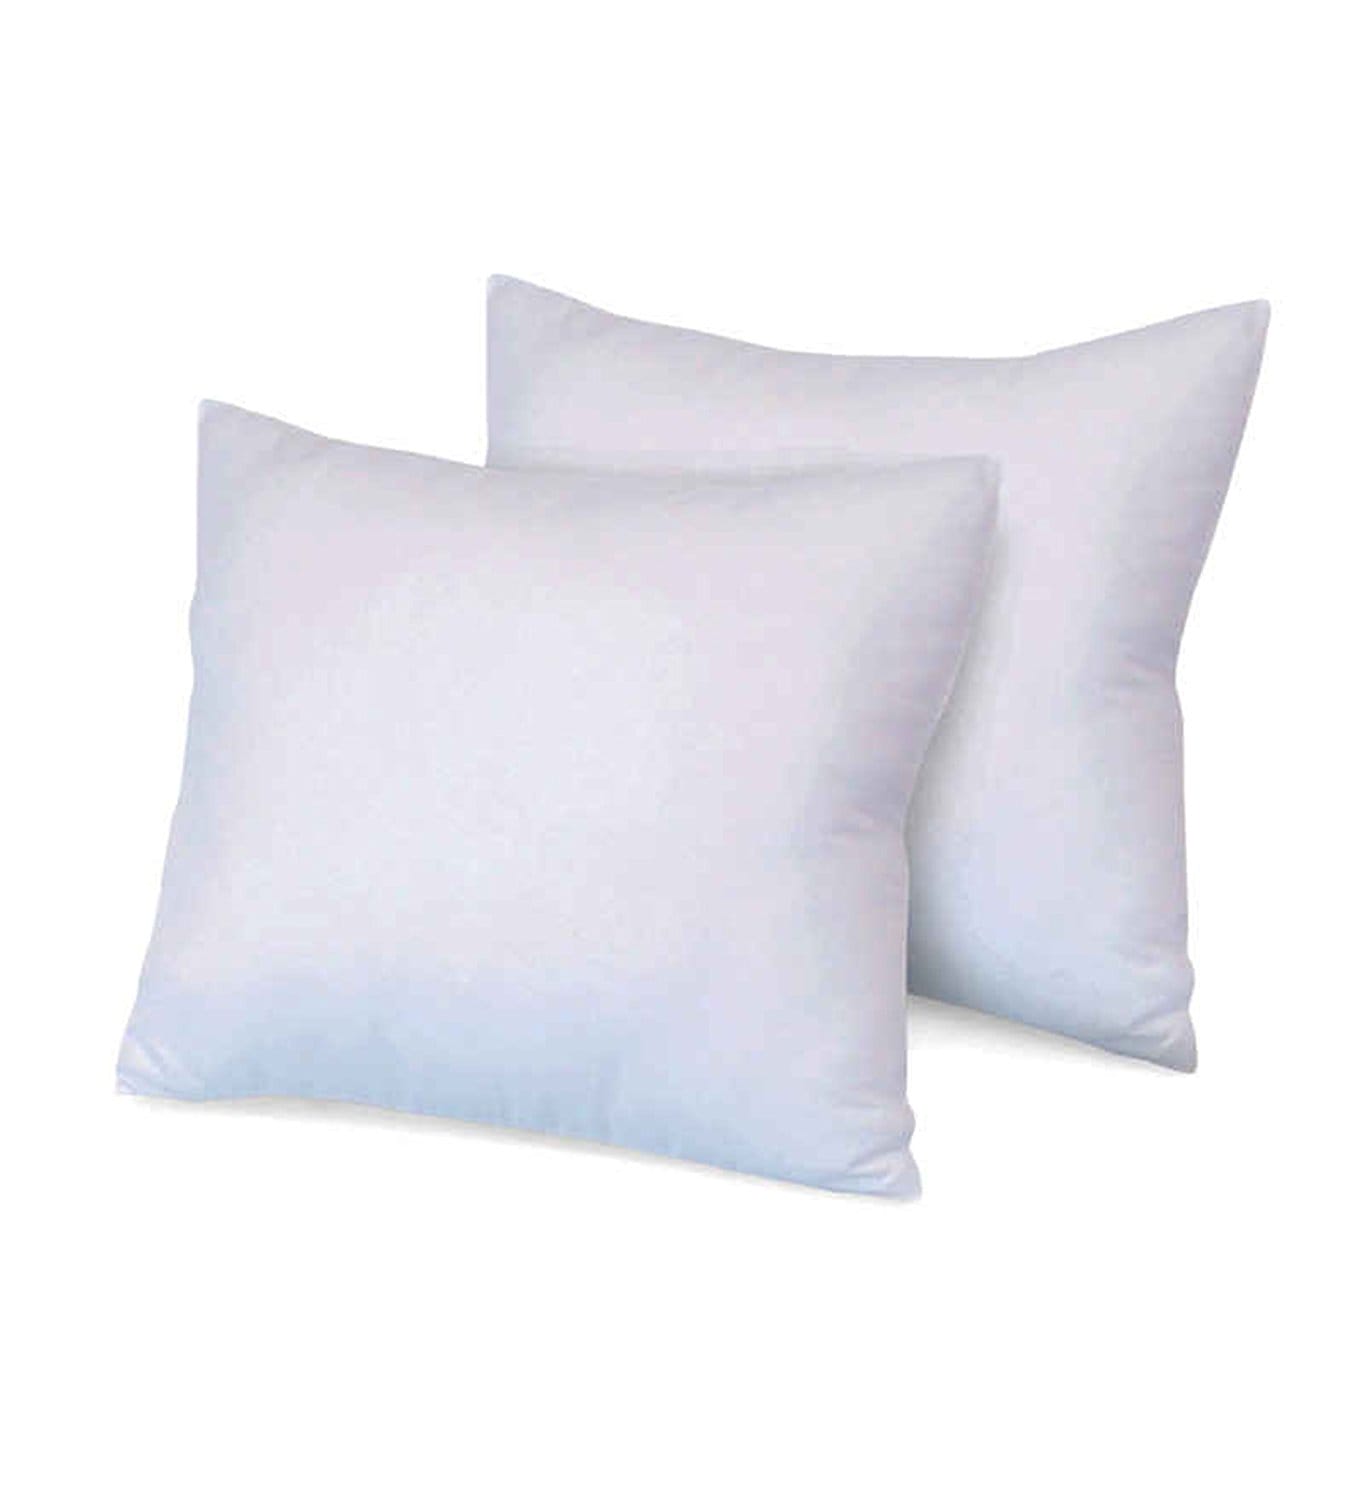 Soft White Fiber Cushion Fillers/Inserts(18*18 inches) online in India at best prices